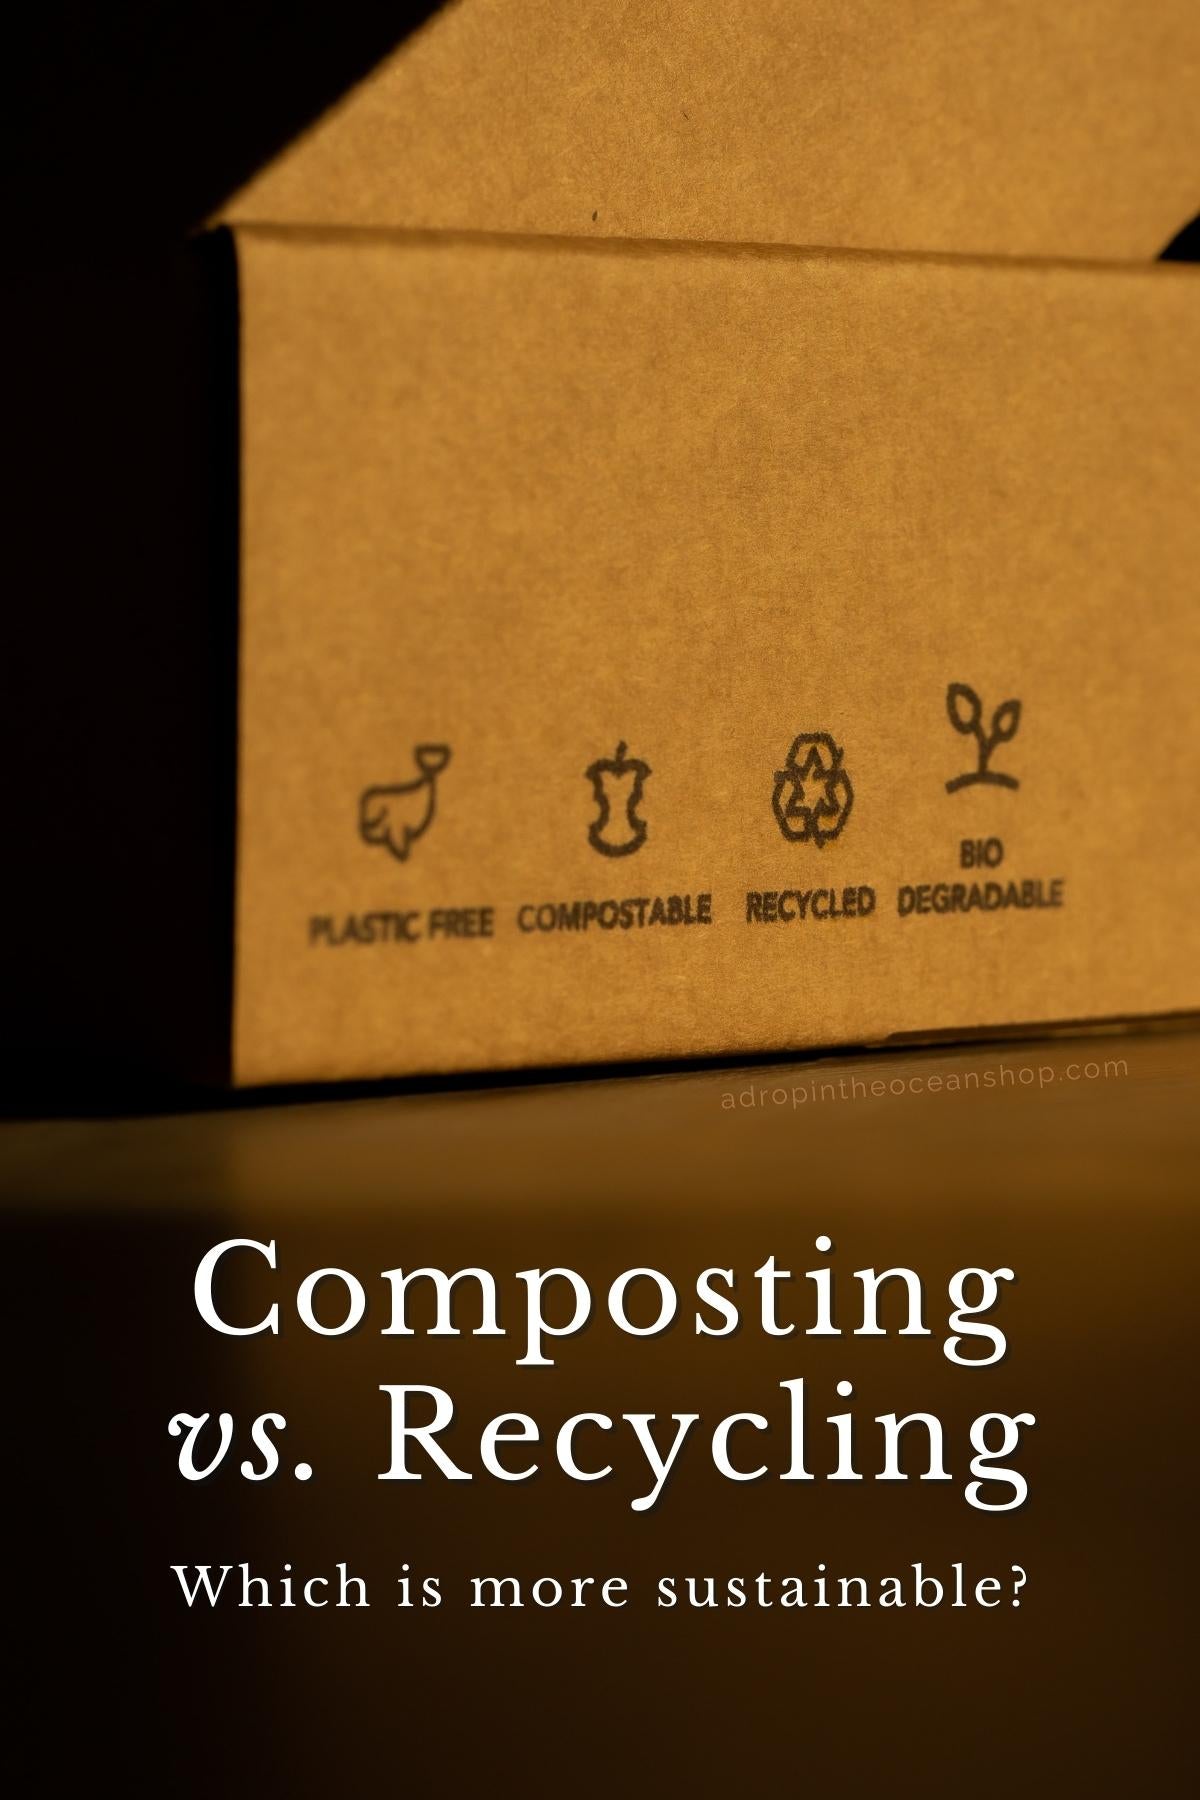 A Drop in the Ocean Zero Waste Store: Composting vs. Recycling - Which is more sustainable?